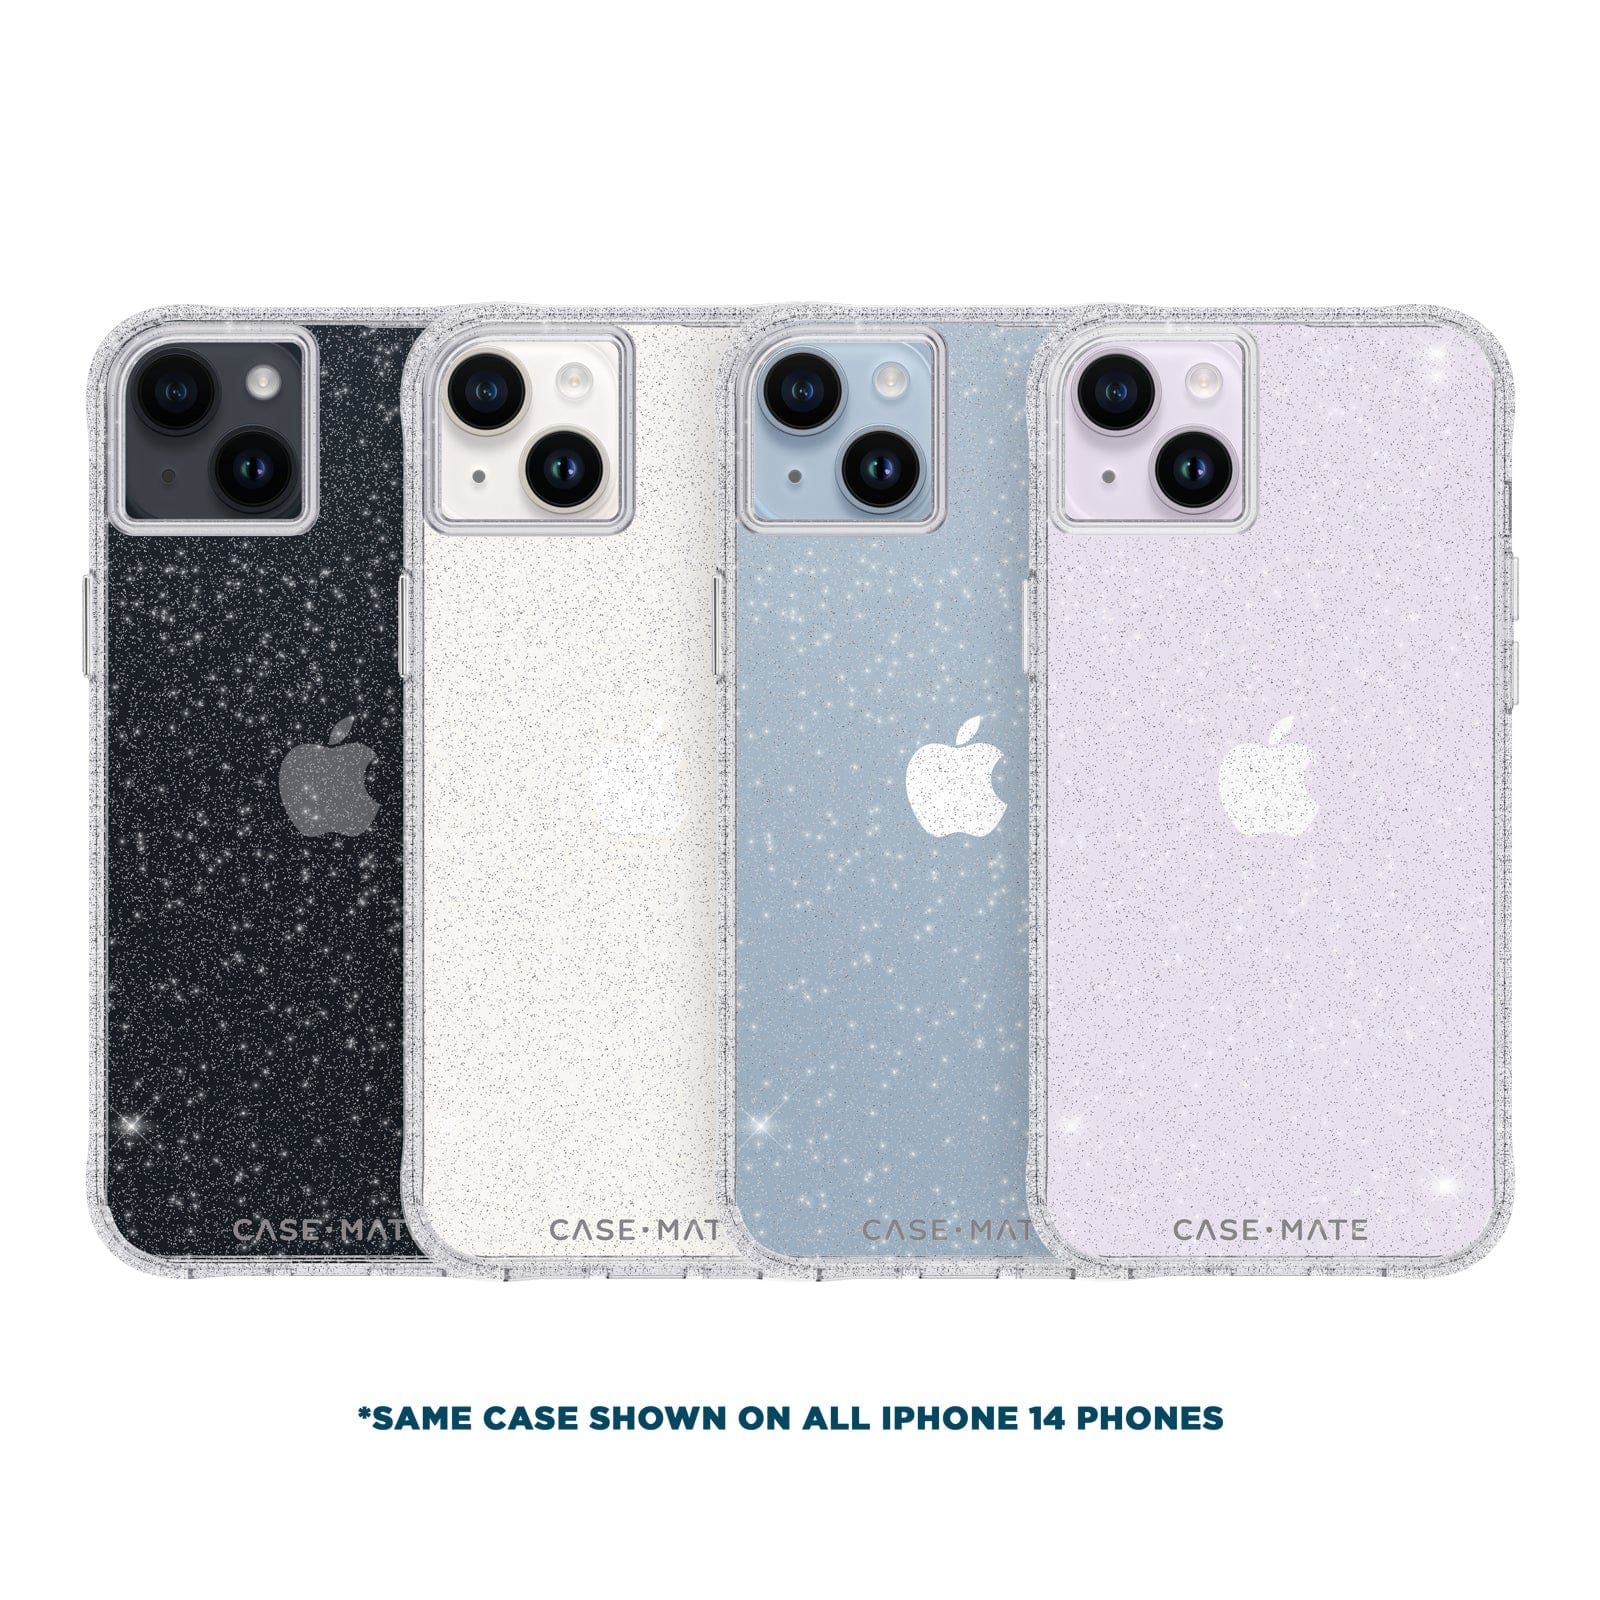 *SAME CASE SHOWN ON ALL IPHONE 14 PHONES